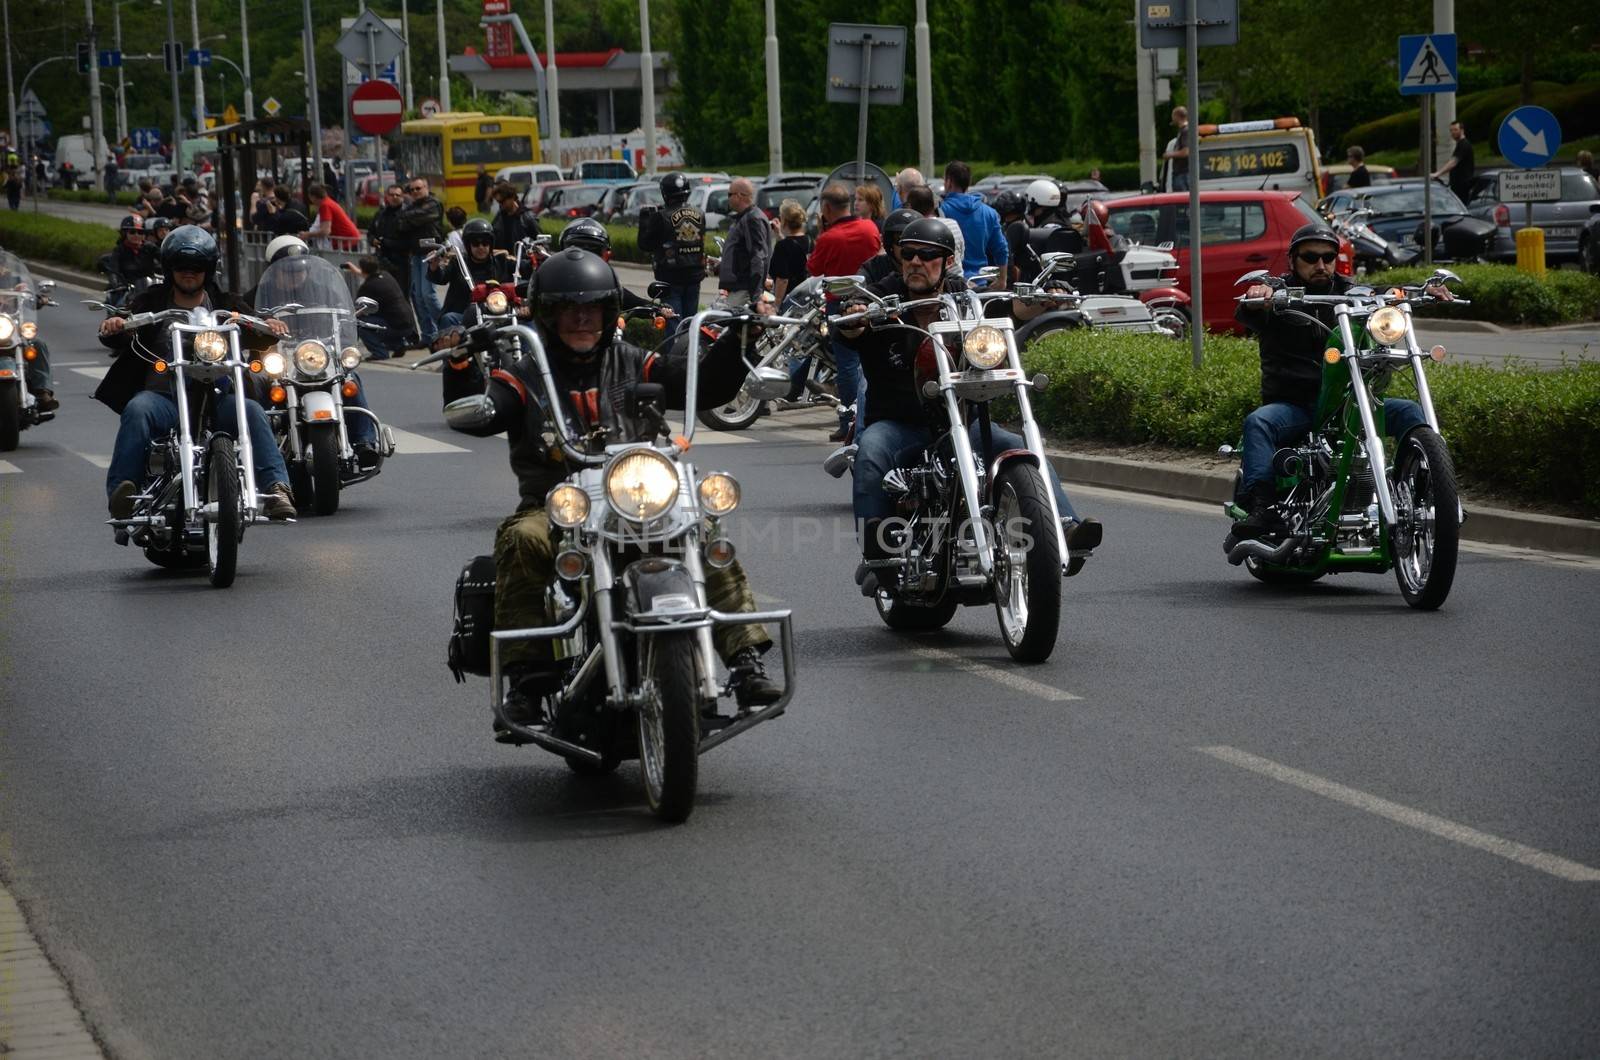 WROCLAW, POLAND - MAY 18: Harey-Davidson motor parade in city center. Around 8 thousands motorcyclist joined international event Super Rally from 16 to 20 May 2013 in Wroclaw, Poland.